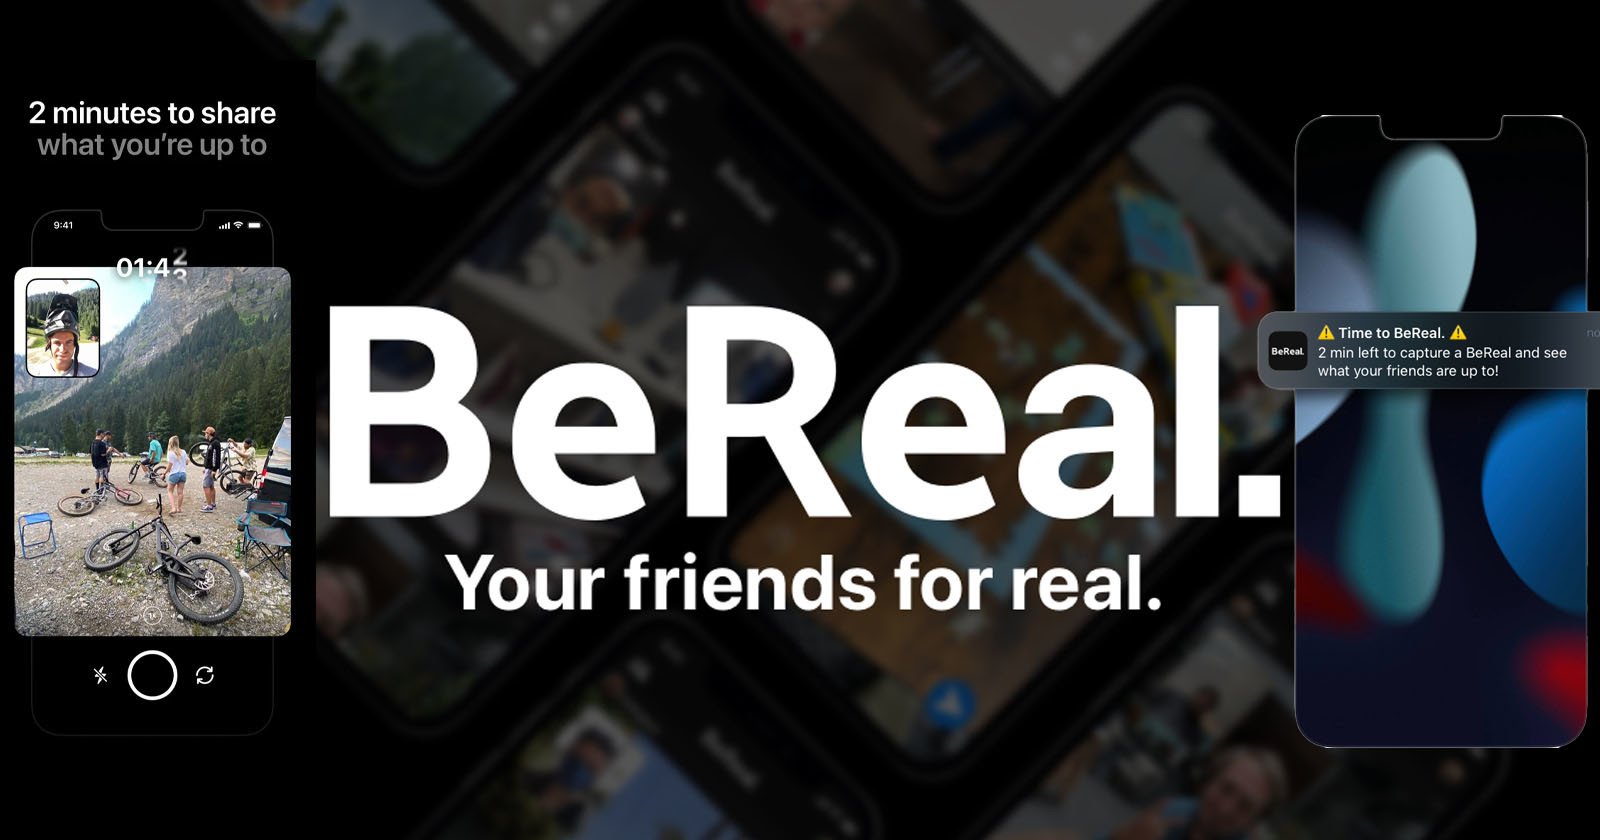  bereal tops million downloads but only users open 